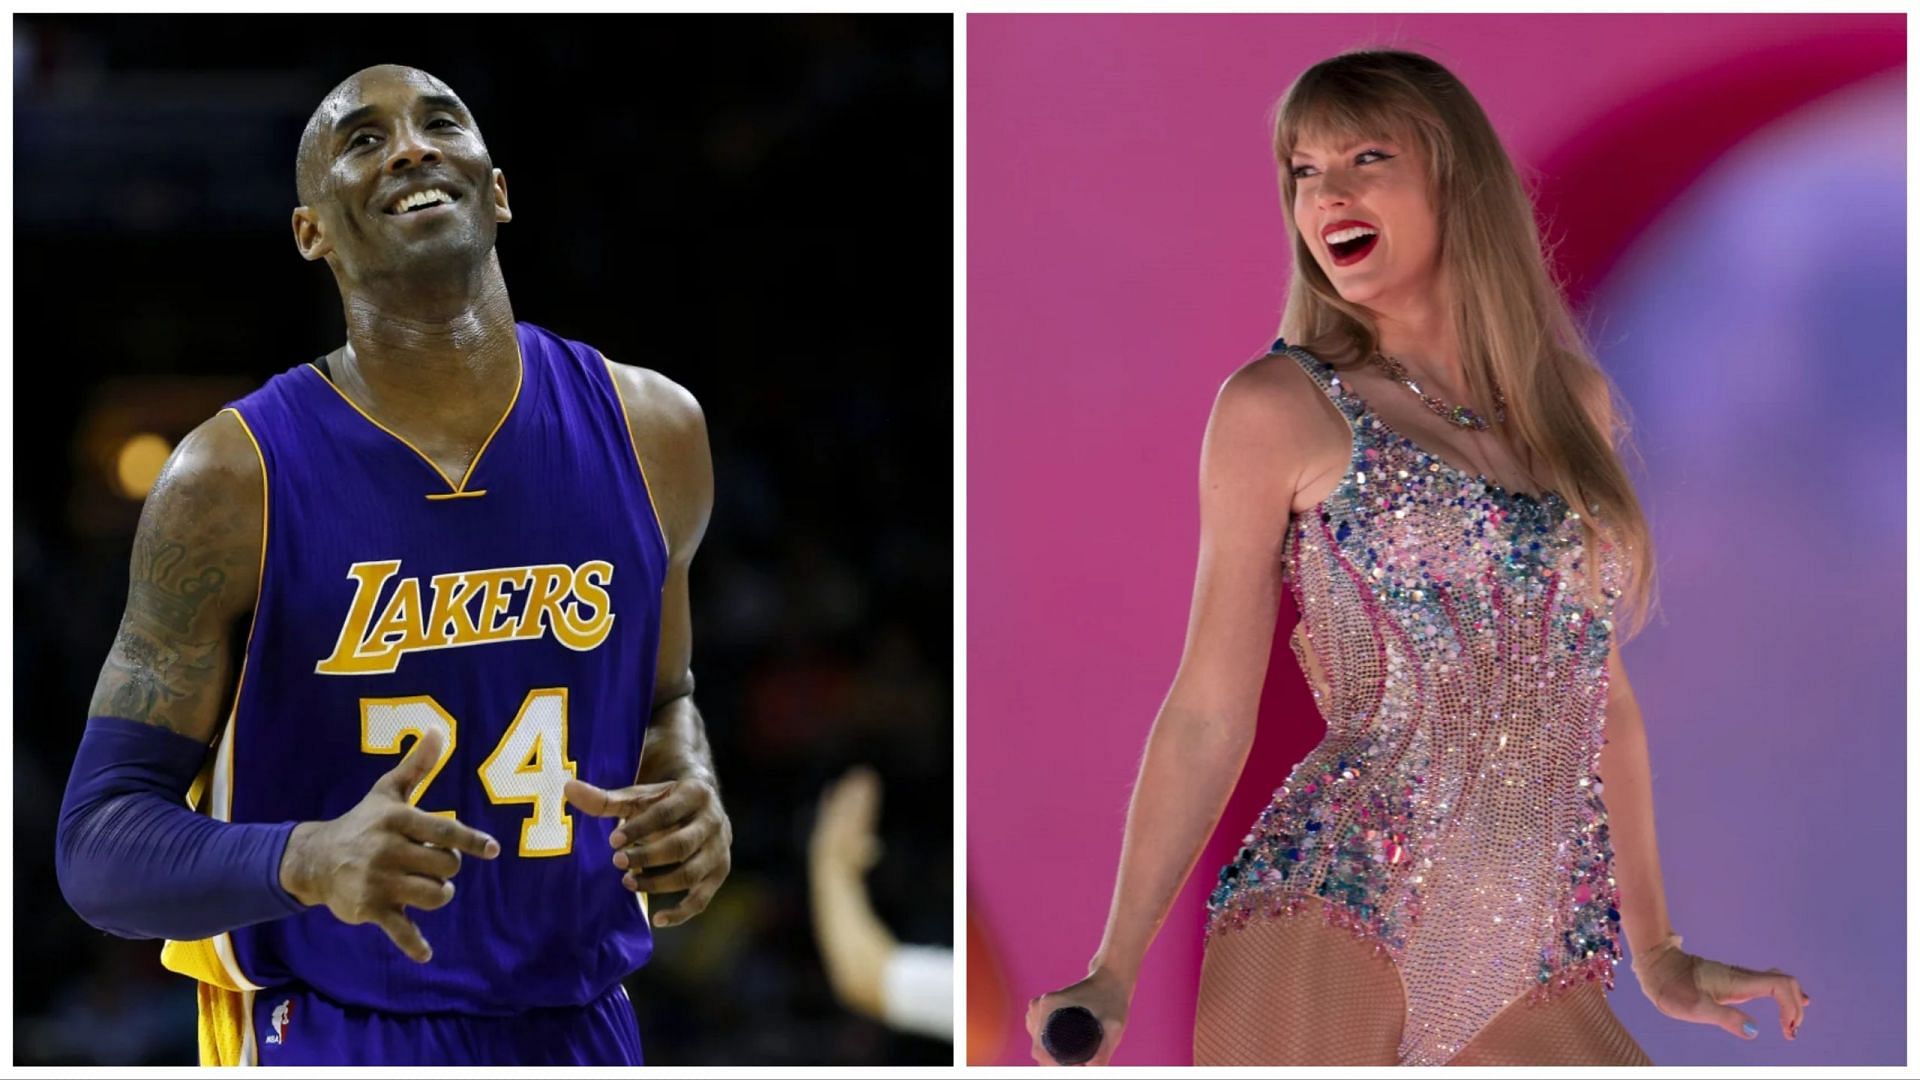 The late Kobe Bryant (left) once had high praise for famous musician Taylor Swift (right) and her consistent success (AP Photo)